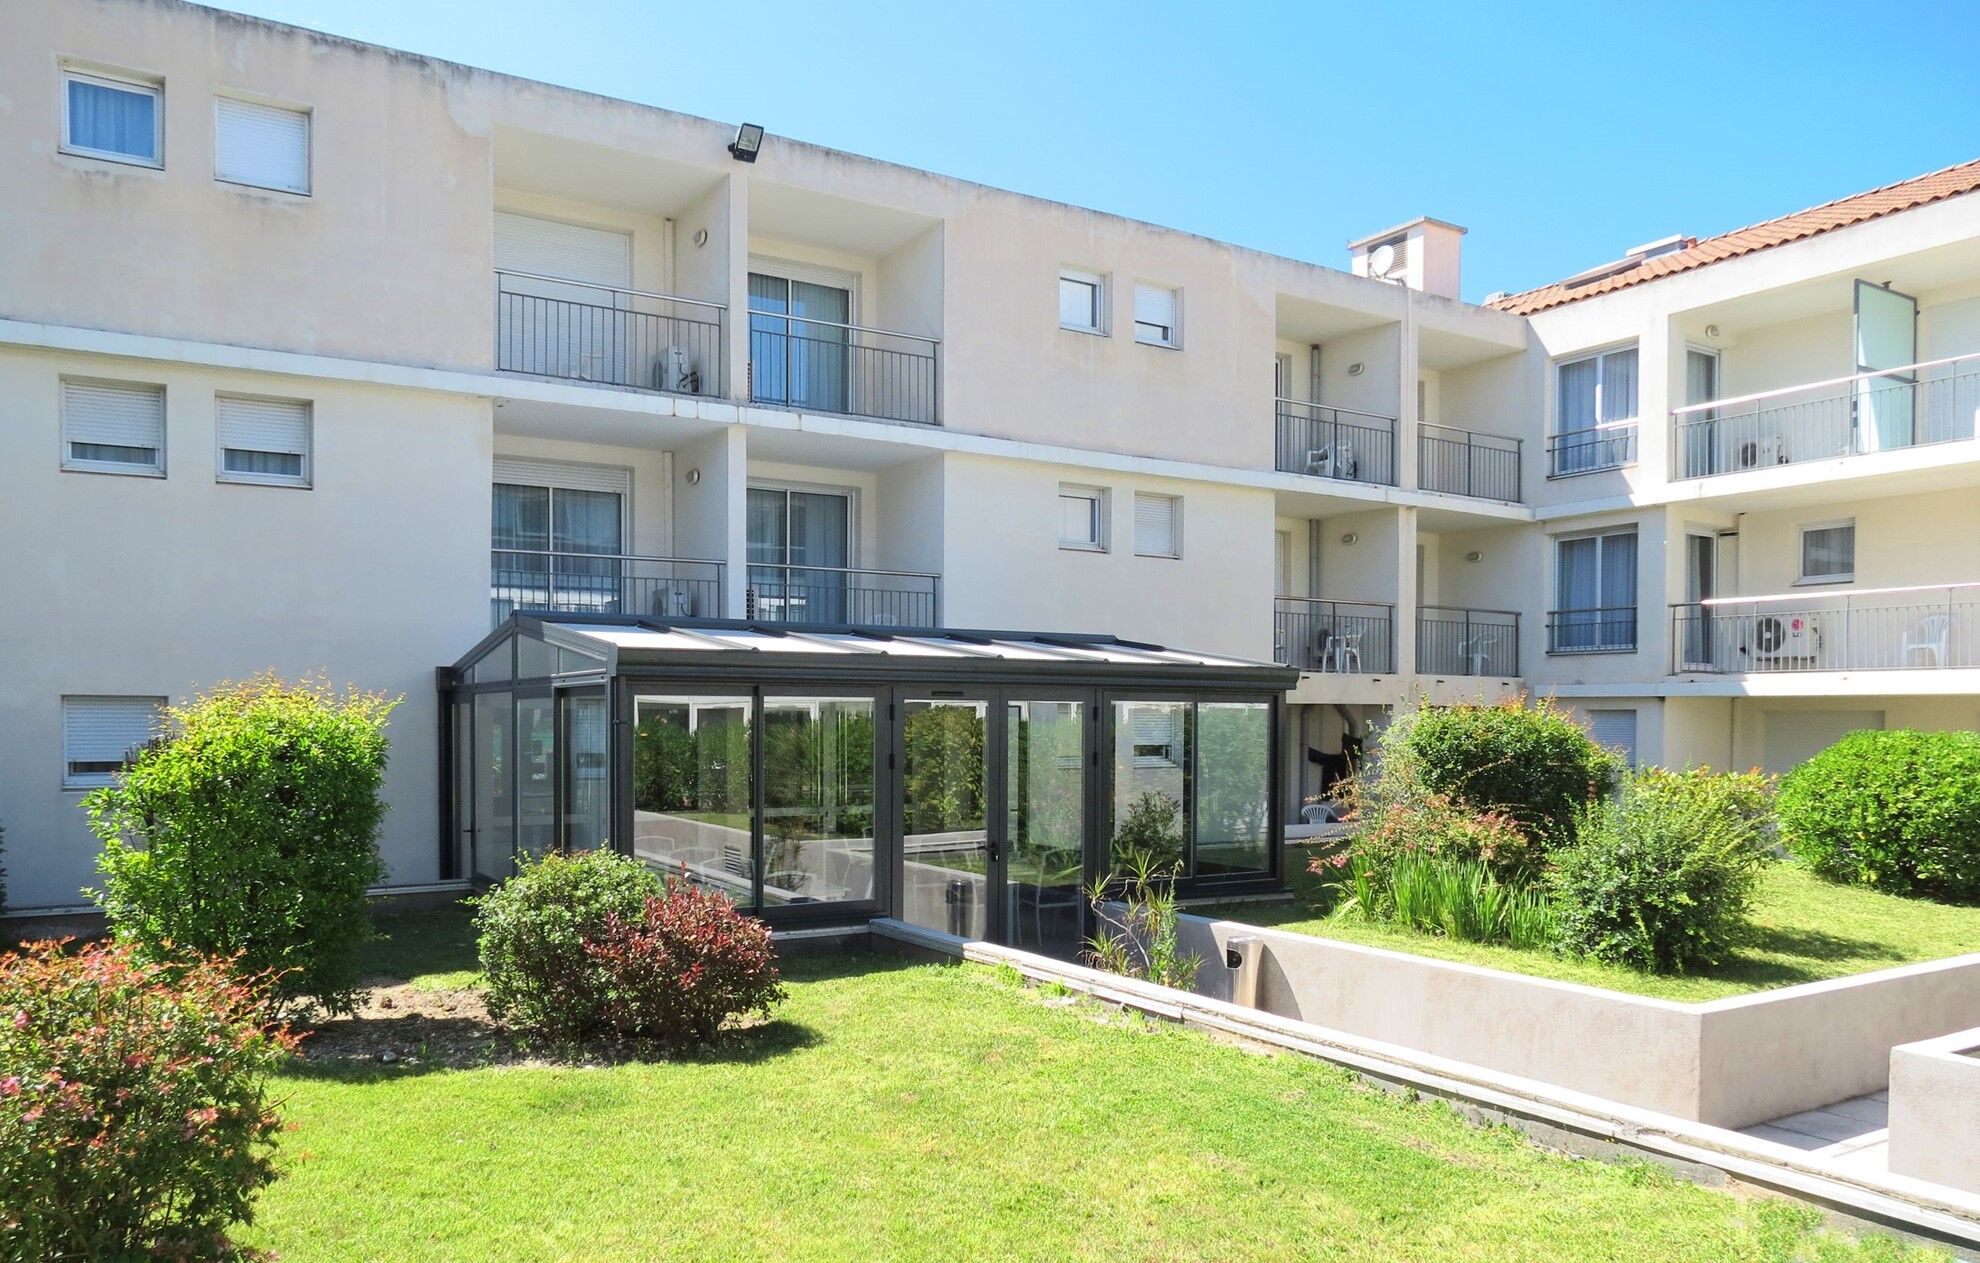 residence-aix-chartreuse-3p6p